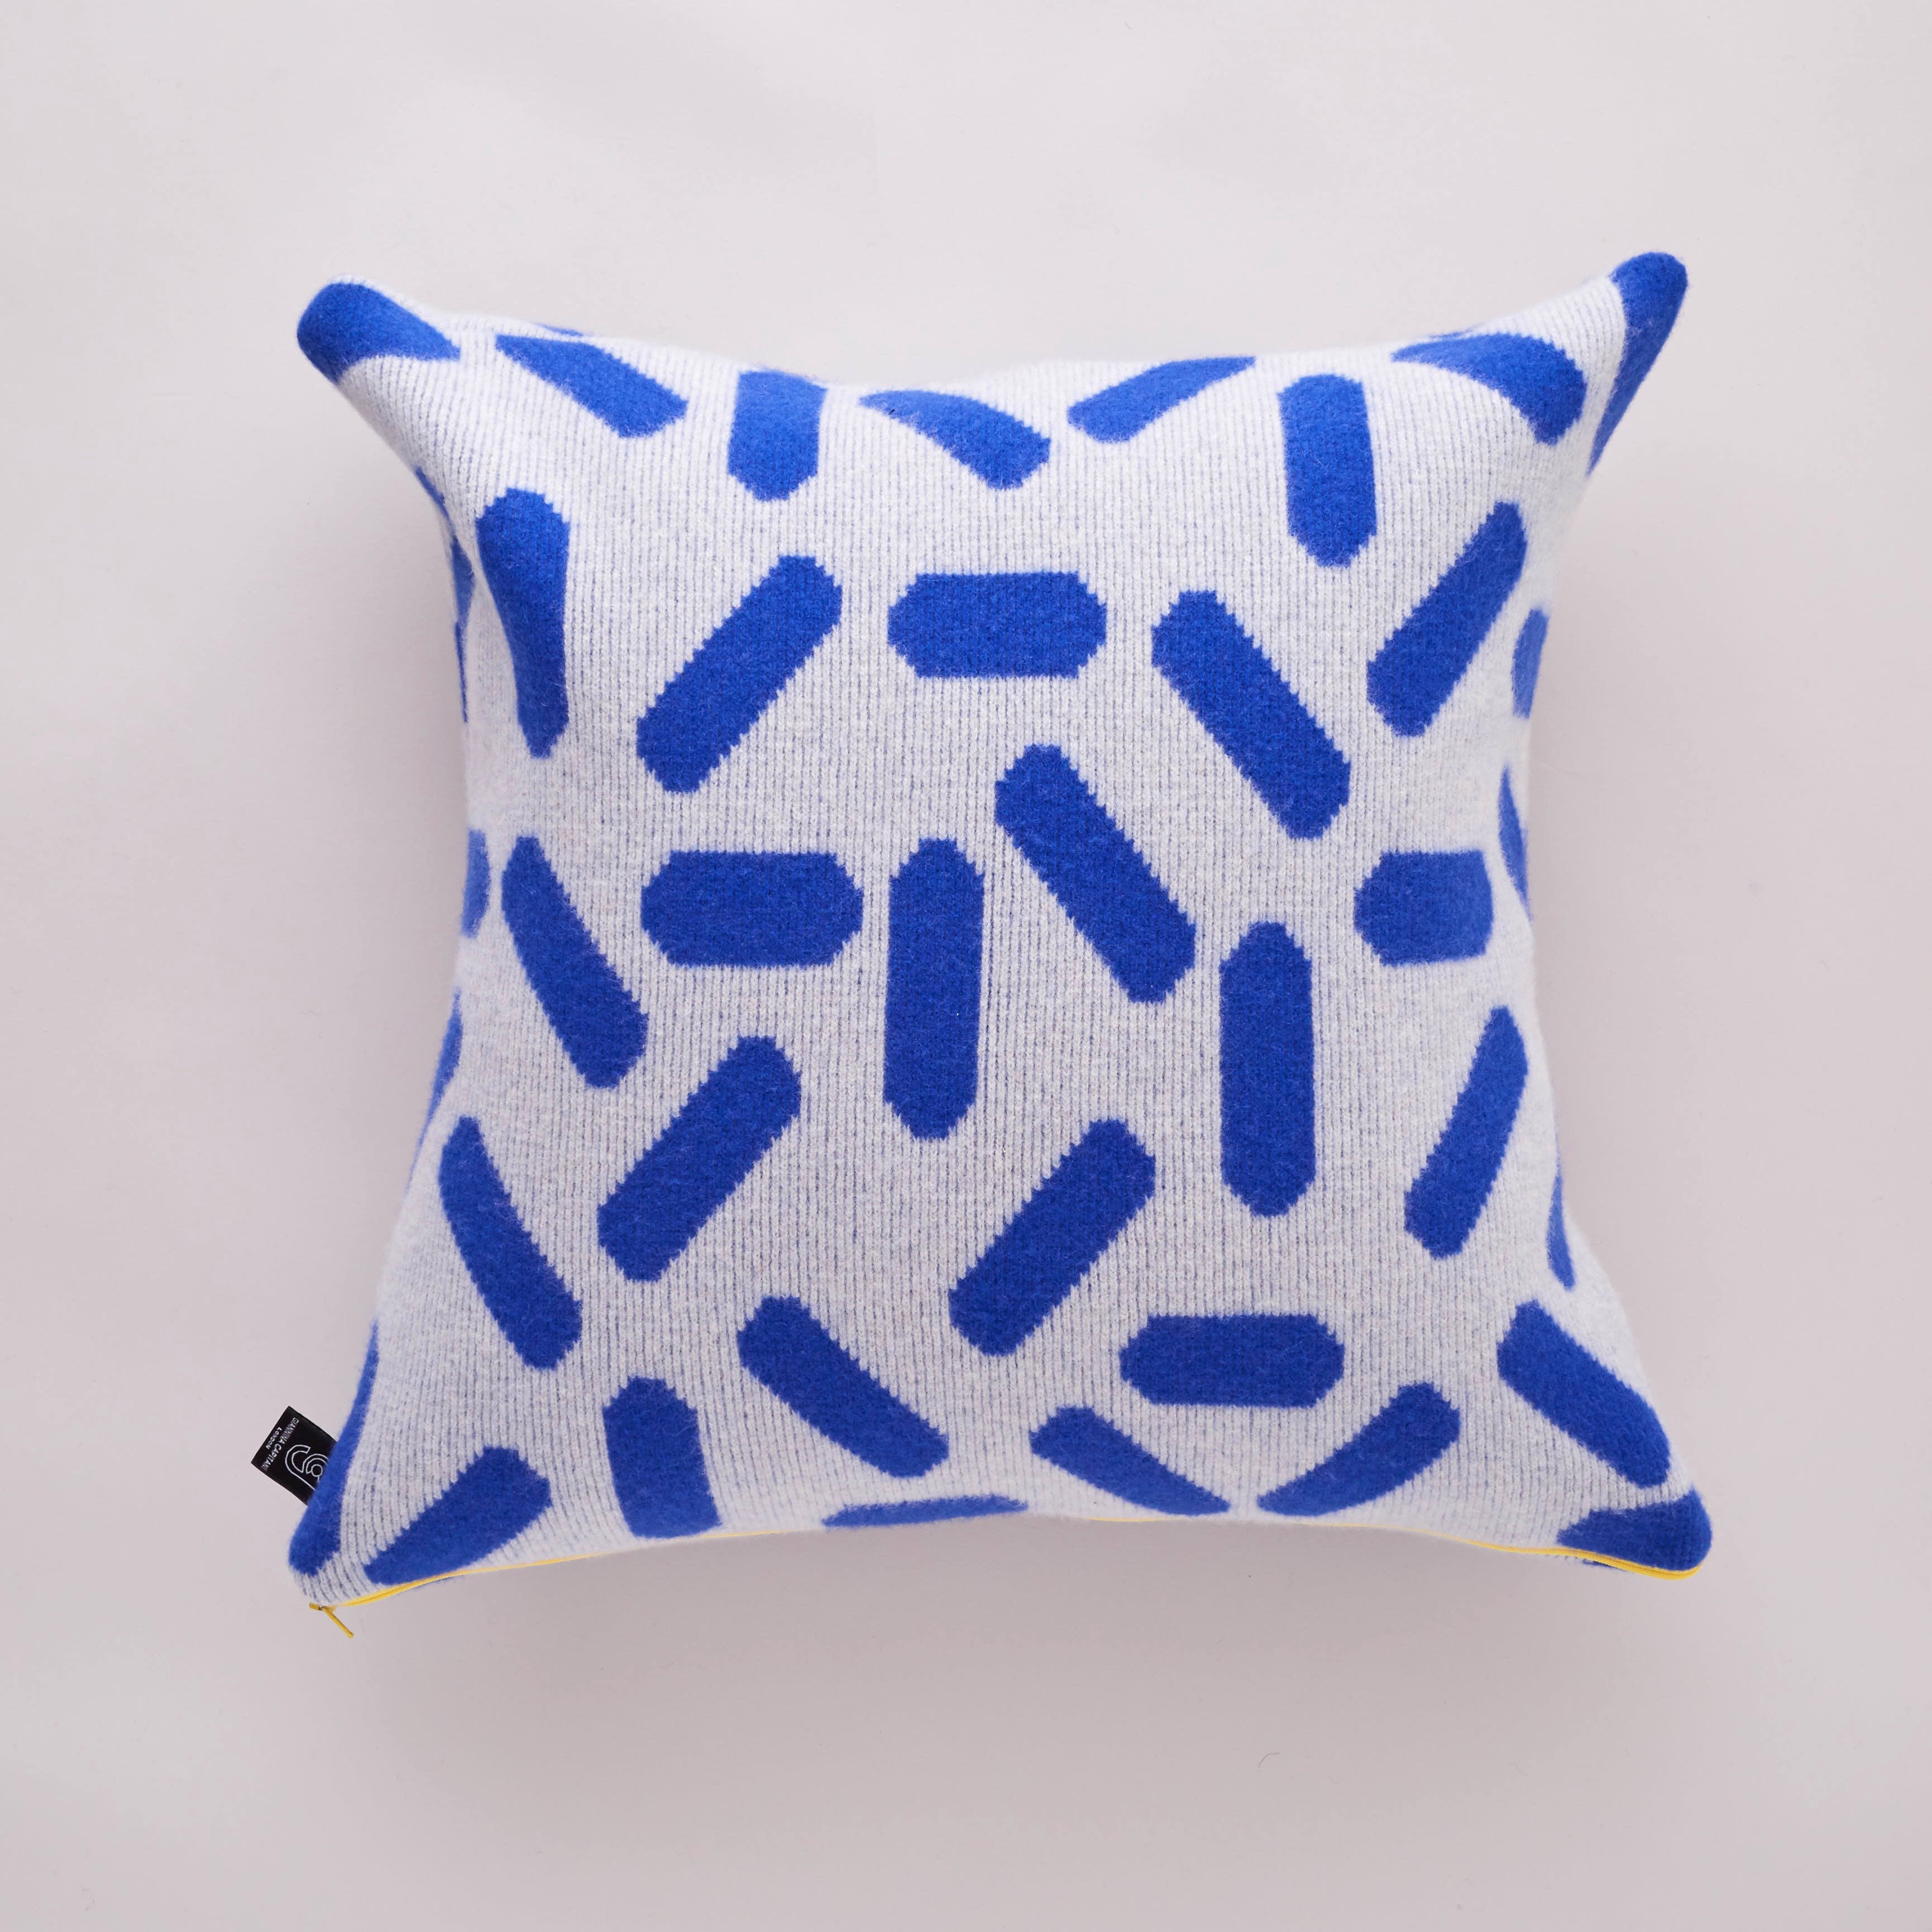 TIC-TAC CUSHION IN GREY AND BLUE